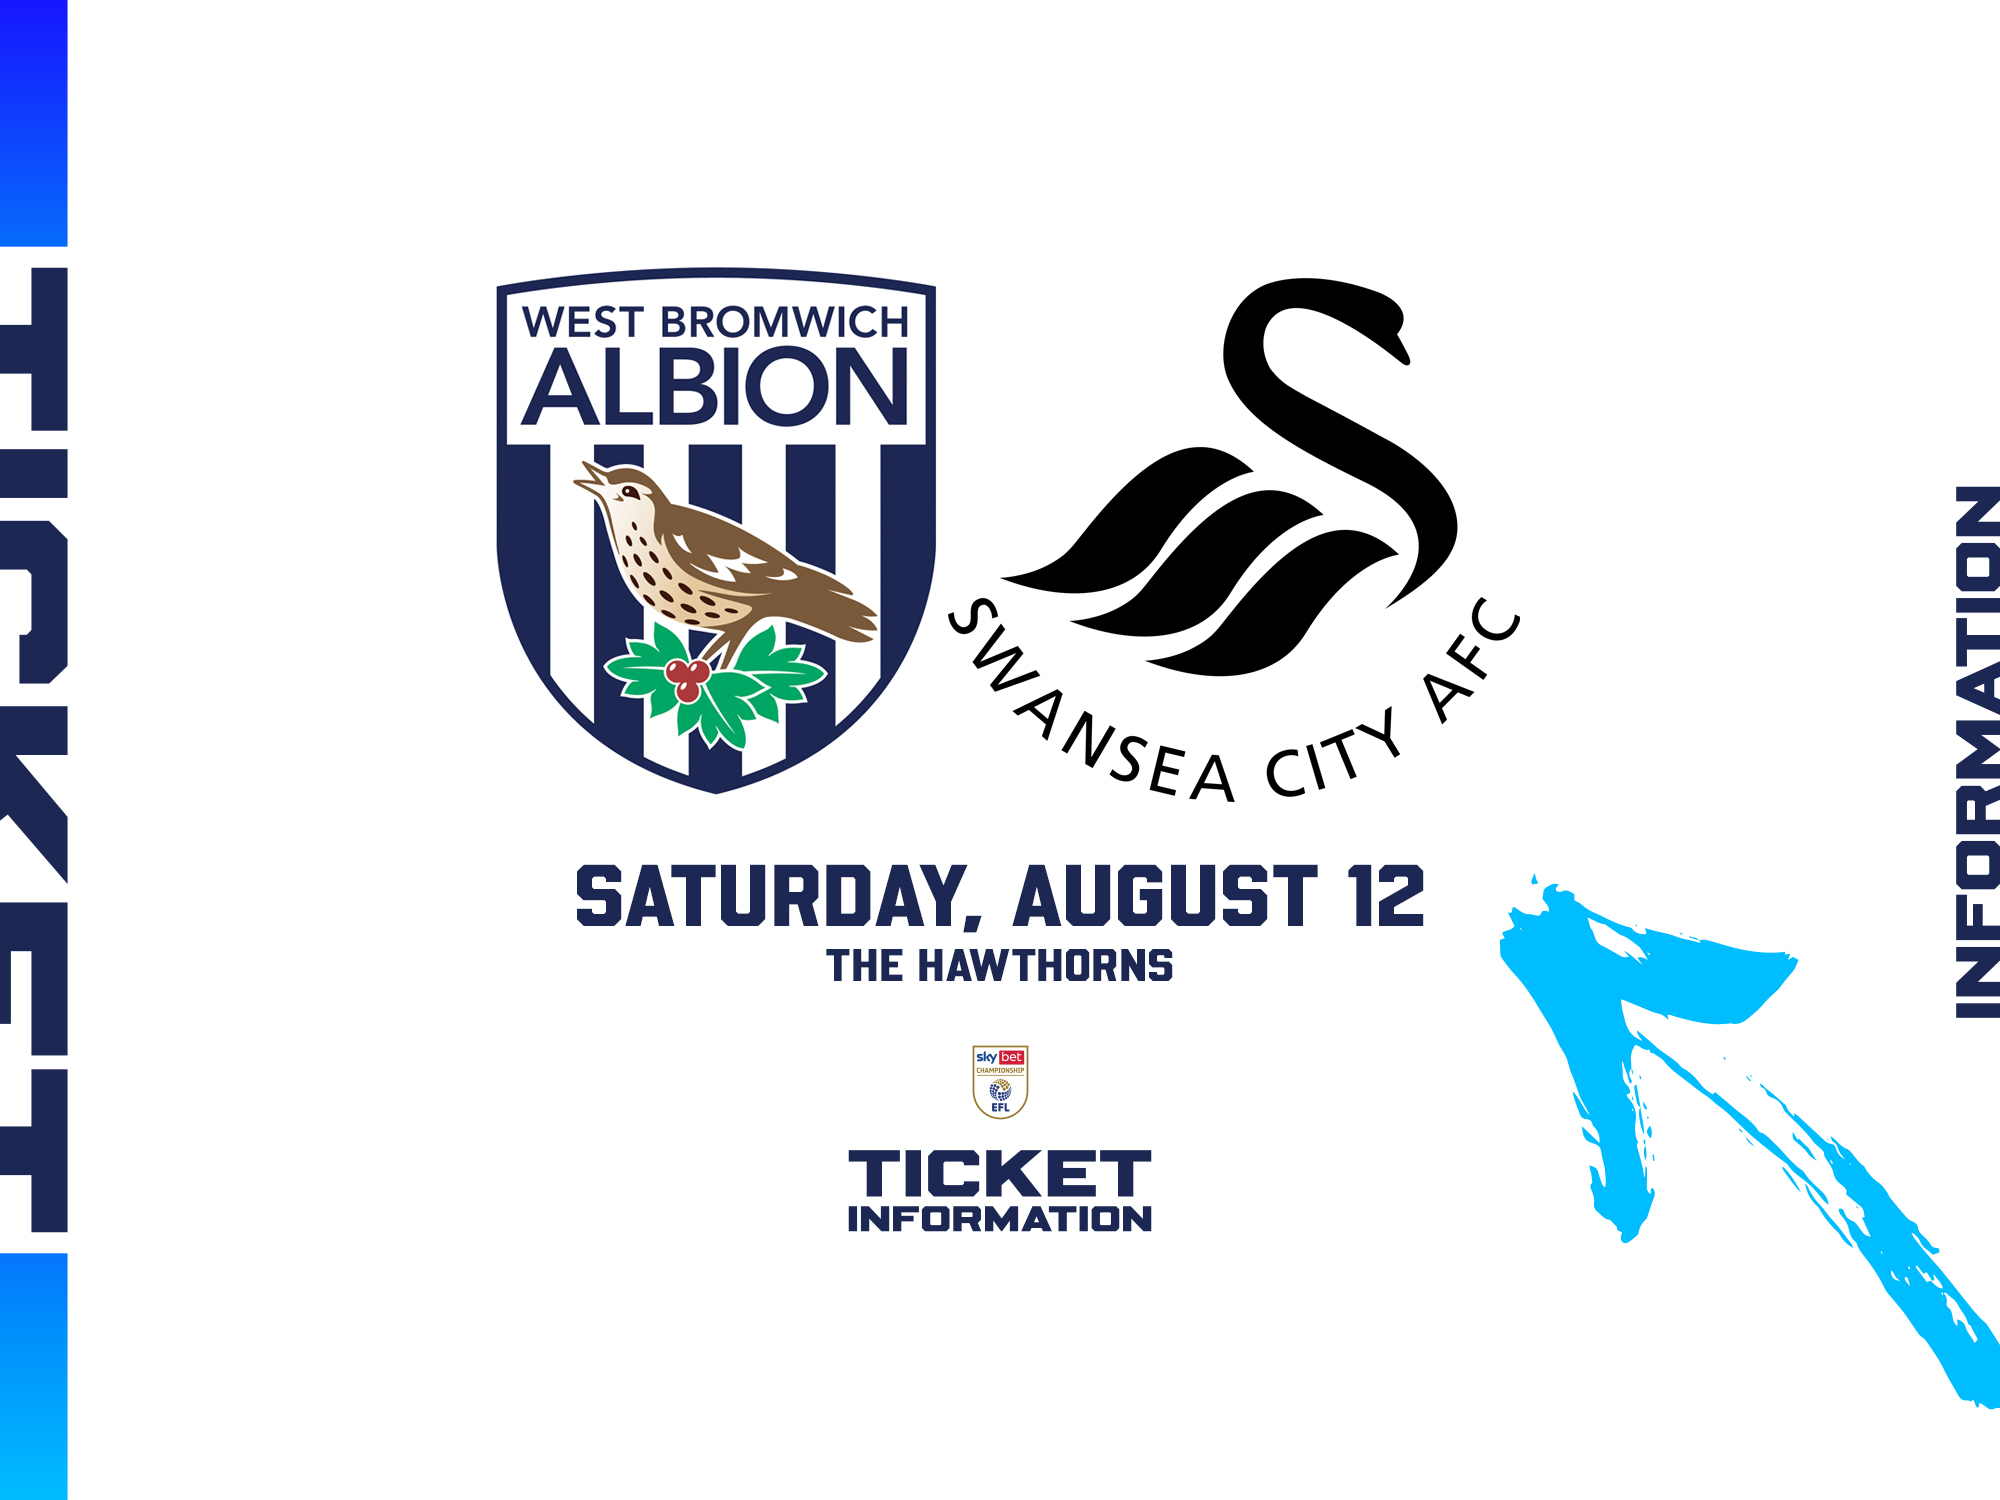 A ticket graphic displaying information for Albion's game against Swansea